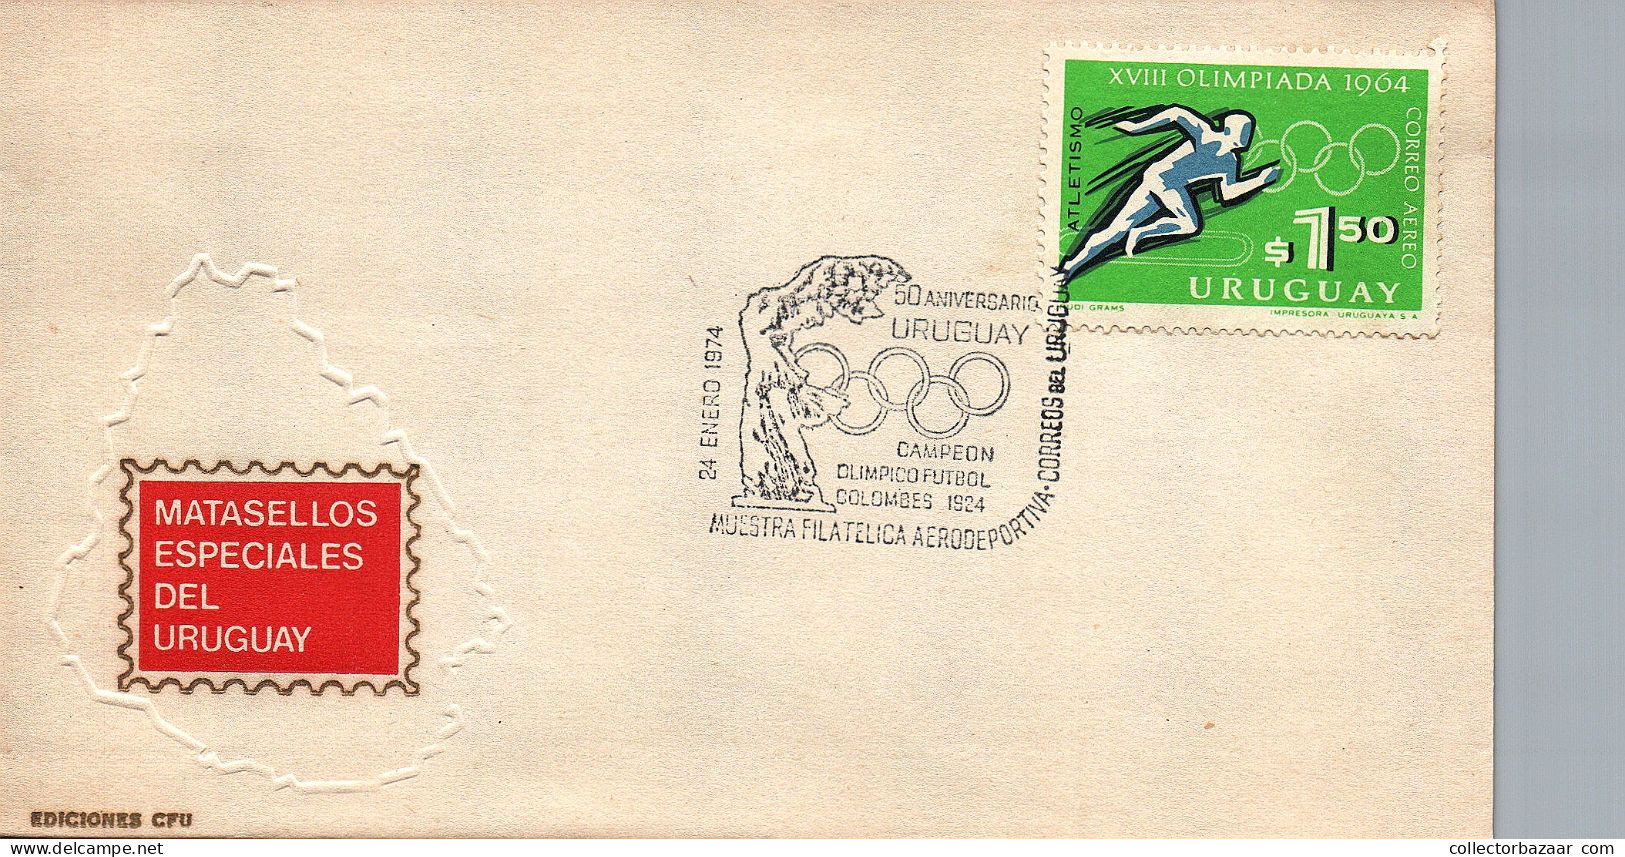 1974 Soccer Football 50th Anniversary Uruguay Olympic Triumph 1924 Paris Colombes Samothrace Greek Sculpture Uruguay FDC - Covers & Documents